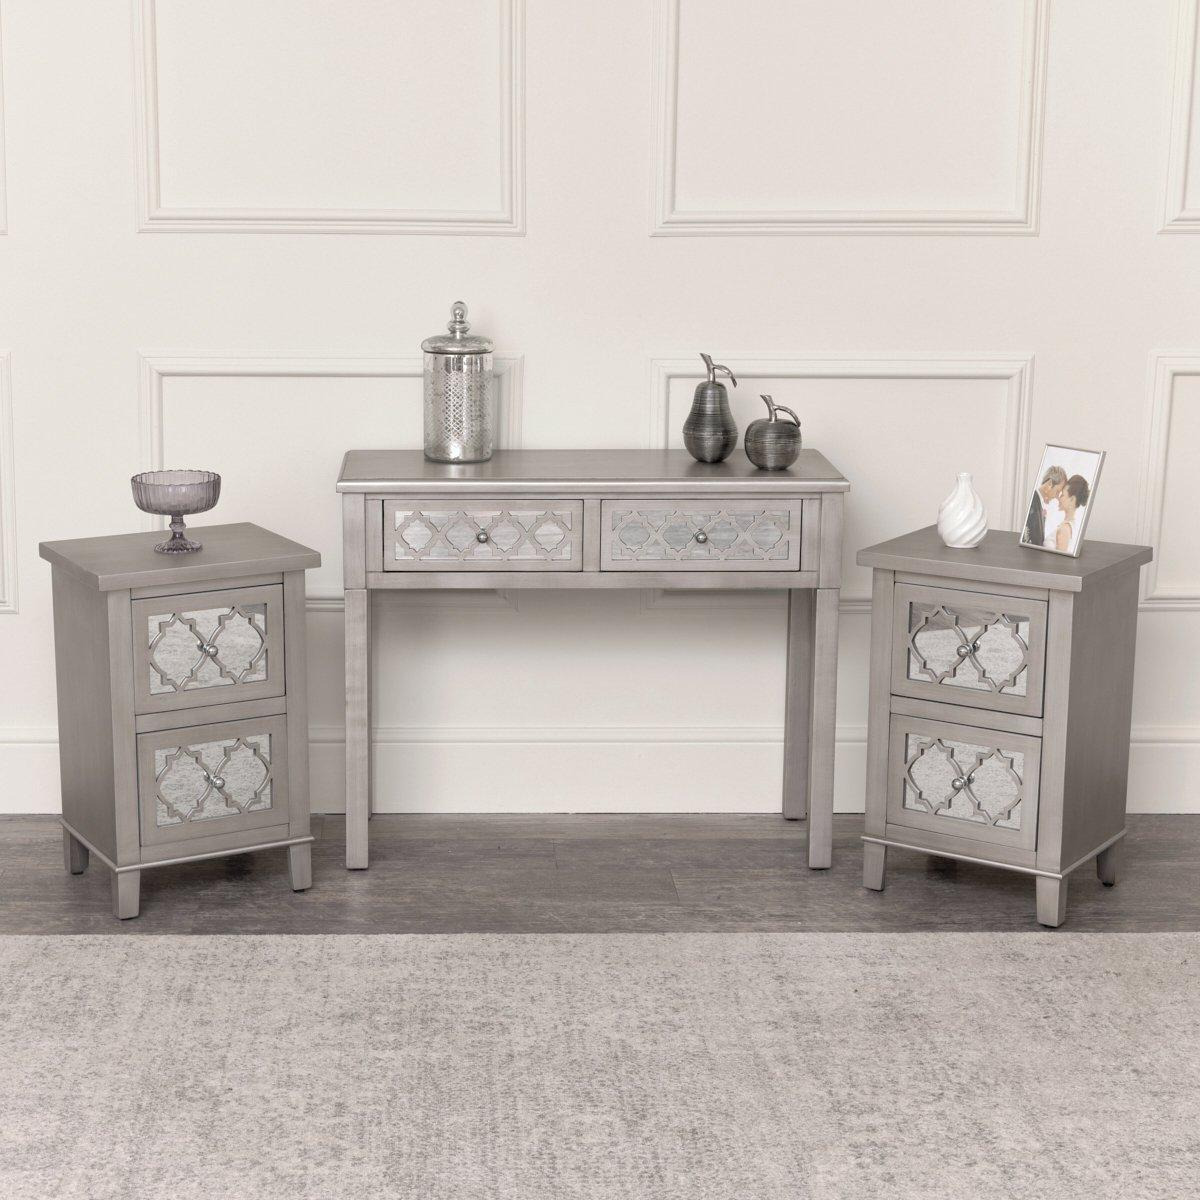 Silver Mirrored Console Table / Dressing Table & Pair Of Silver Mirrored Bedside Tables - Sabrina Silver Range - image 1